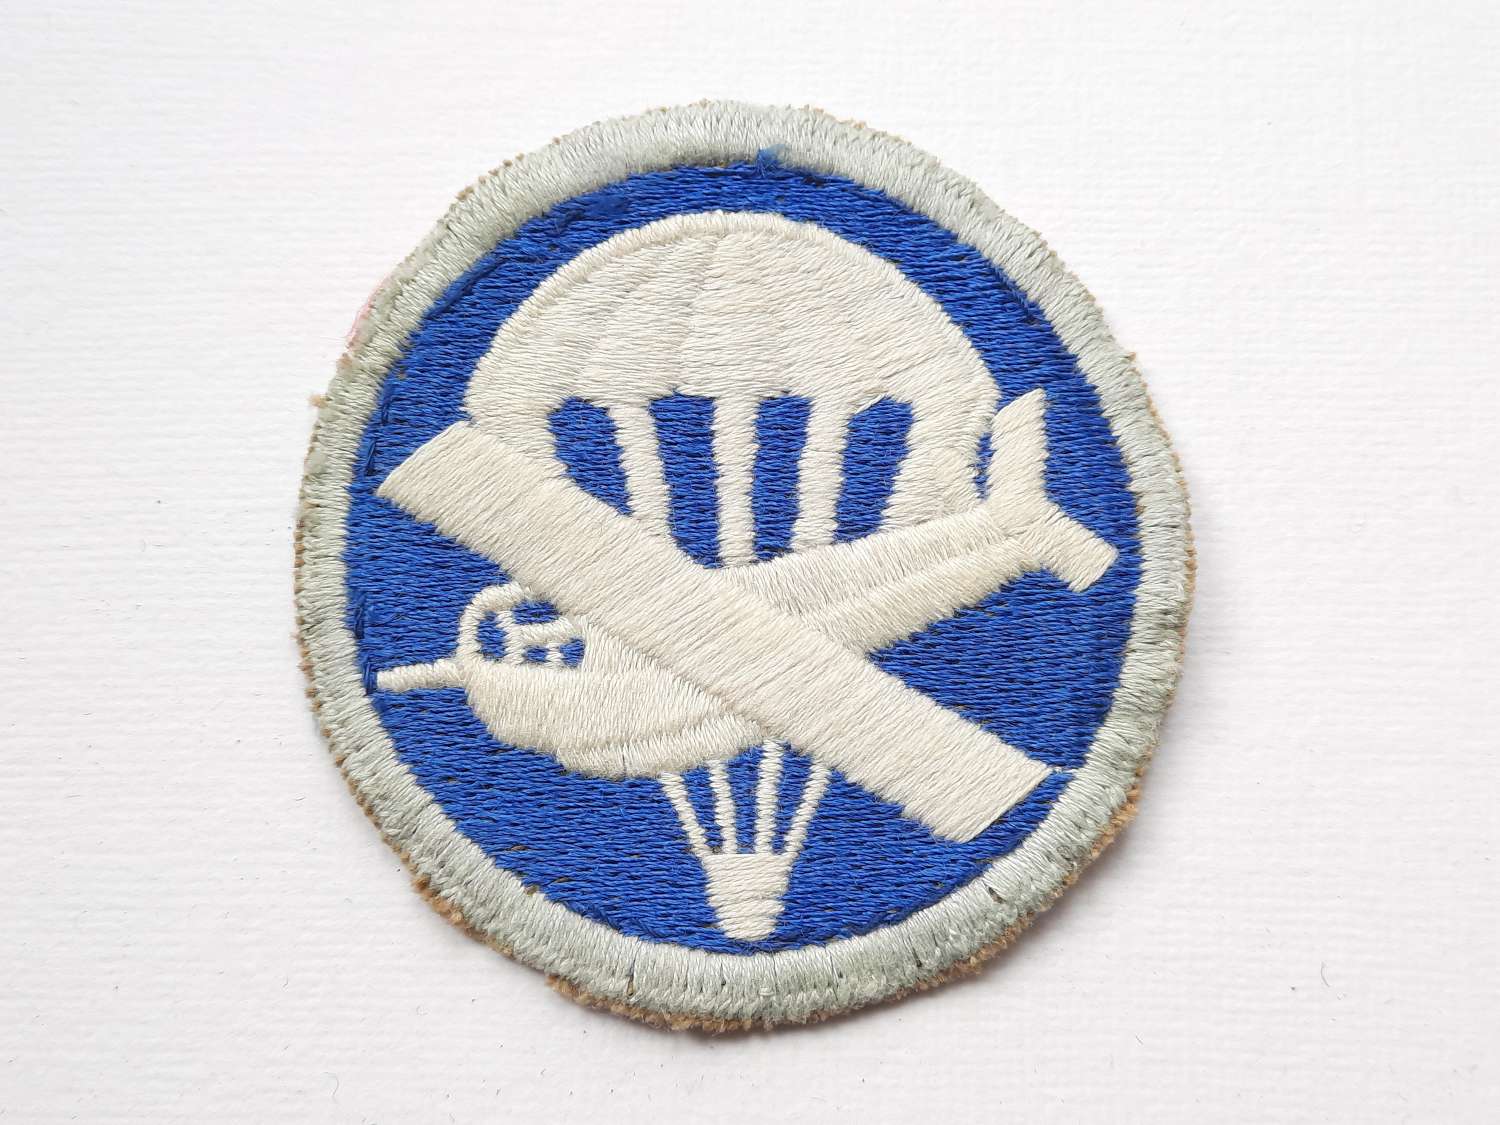 Reproduction WW2 US Parachute/Glider Infantry Enlisted Cap Patch